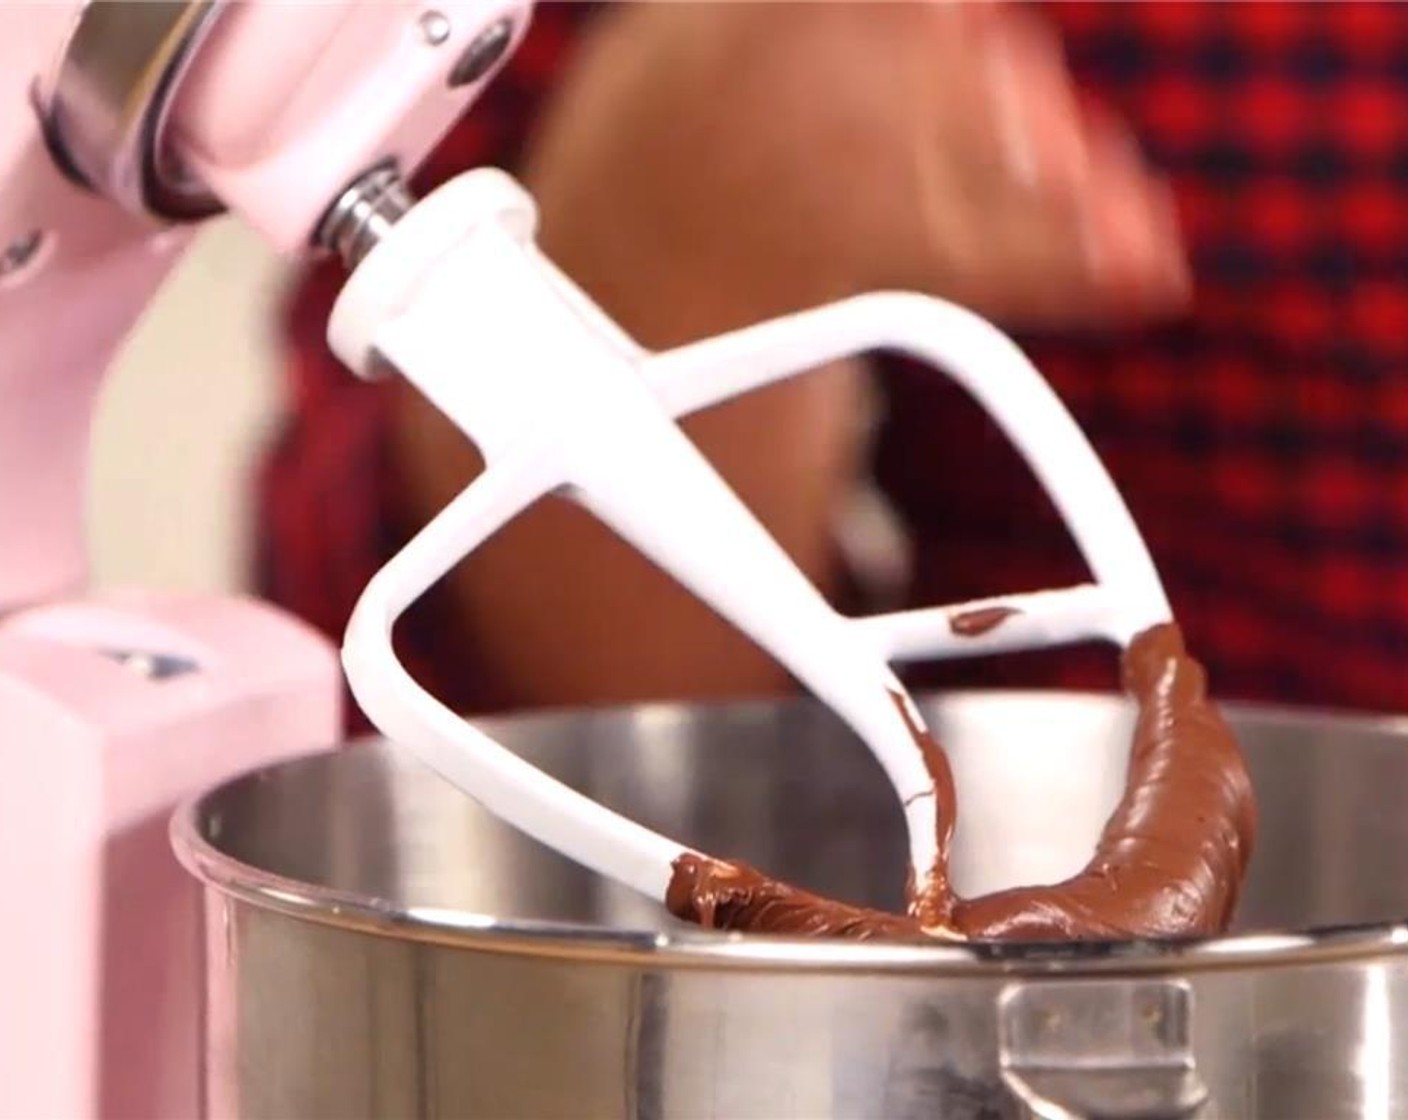 step 1 Using an electric mixer, beat together the Nutella® (1/2 cup) and Powdered Confectioners Sugar (2 Tbsp) until smooth, thickened, and a little stiff.